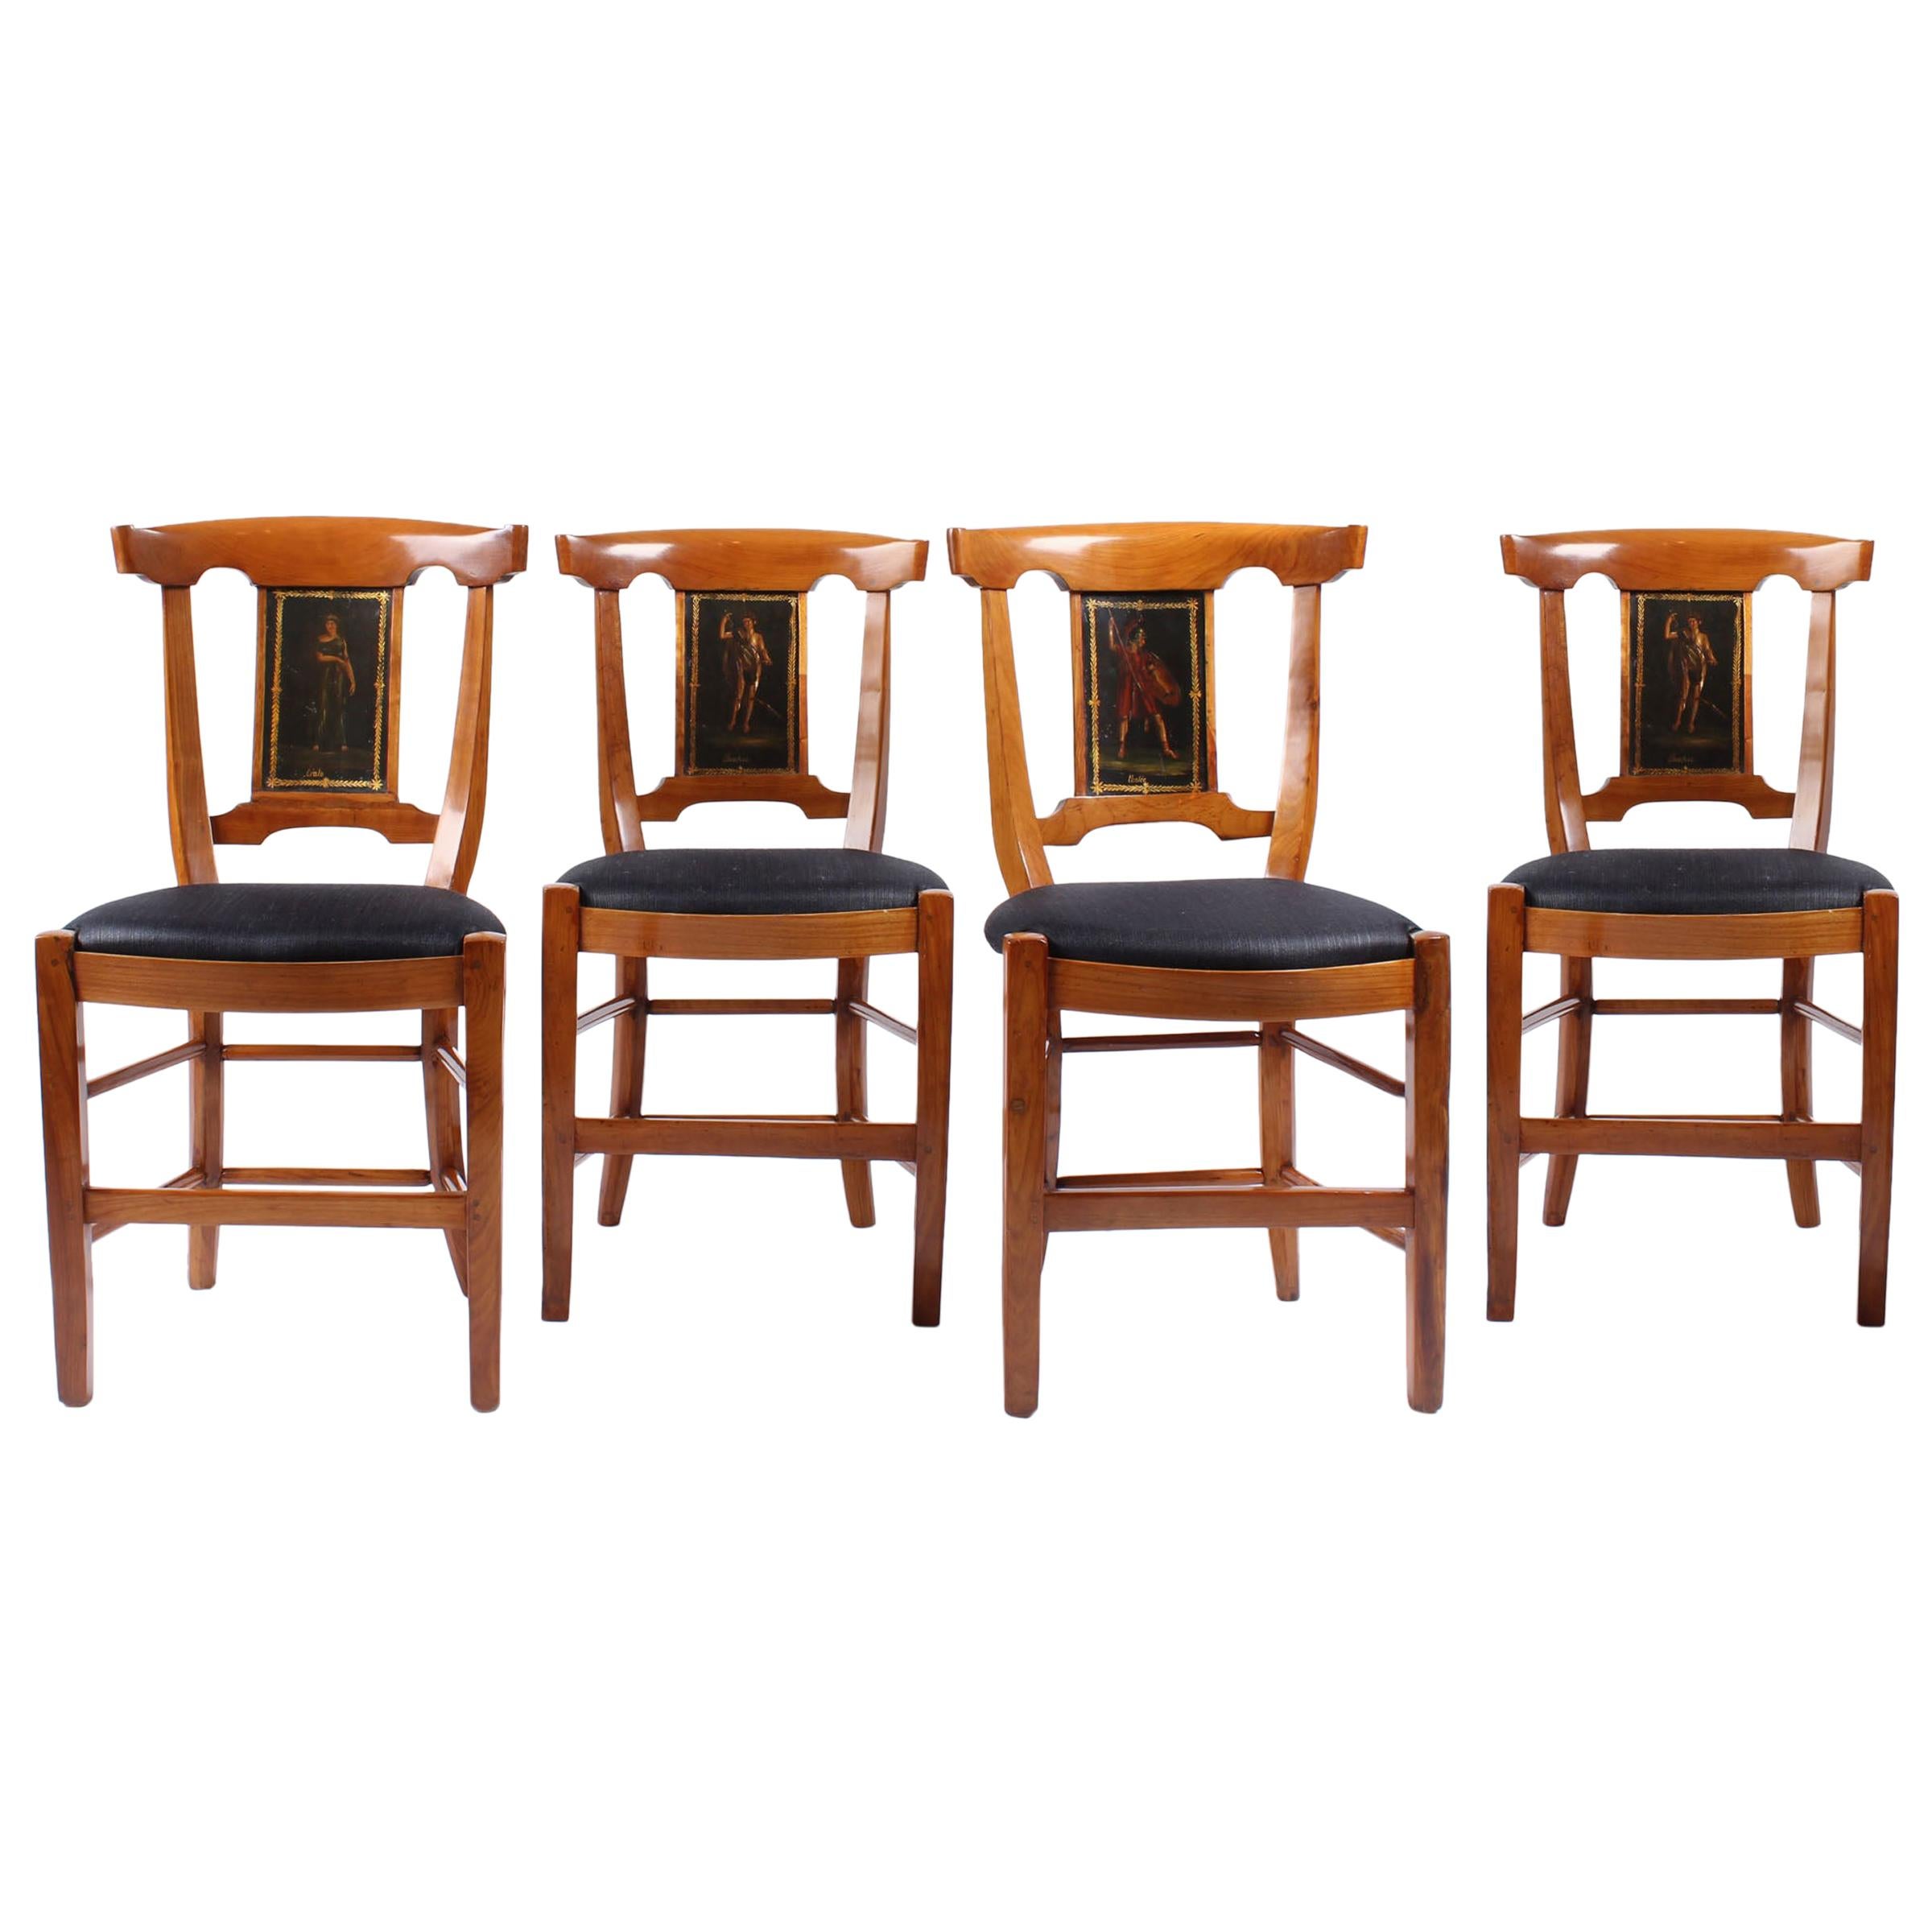 Set of Four 18th Century Chairs, France, Cherry, Painted, Directoire, circa 1800